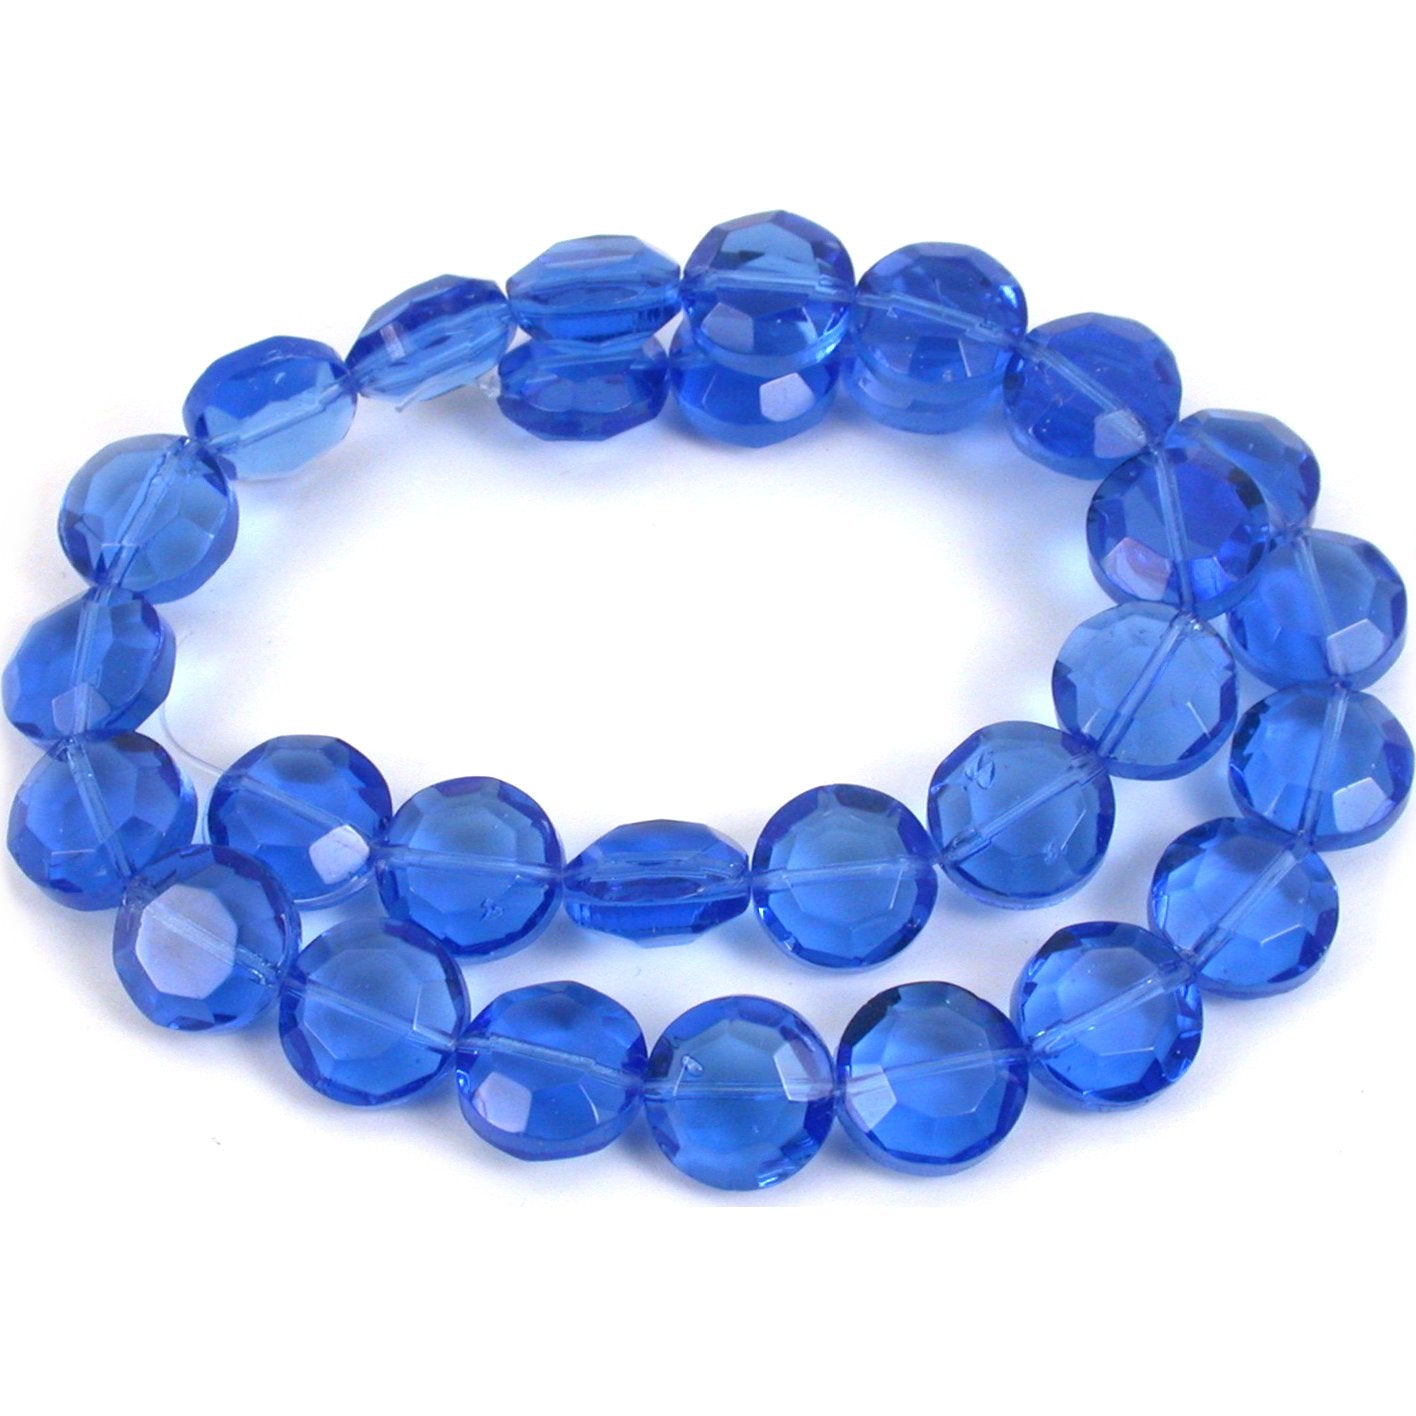 Coin Faceted Fire Polished Chinese Crystal Beads Sapphire 12mm 1 Strand